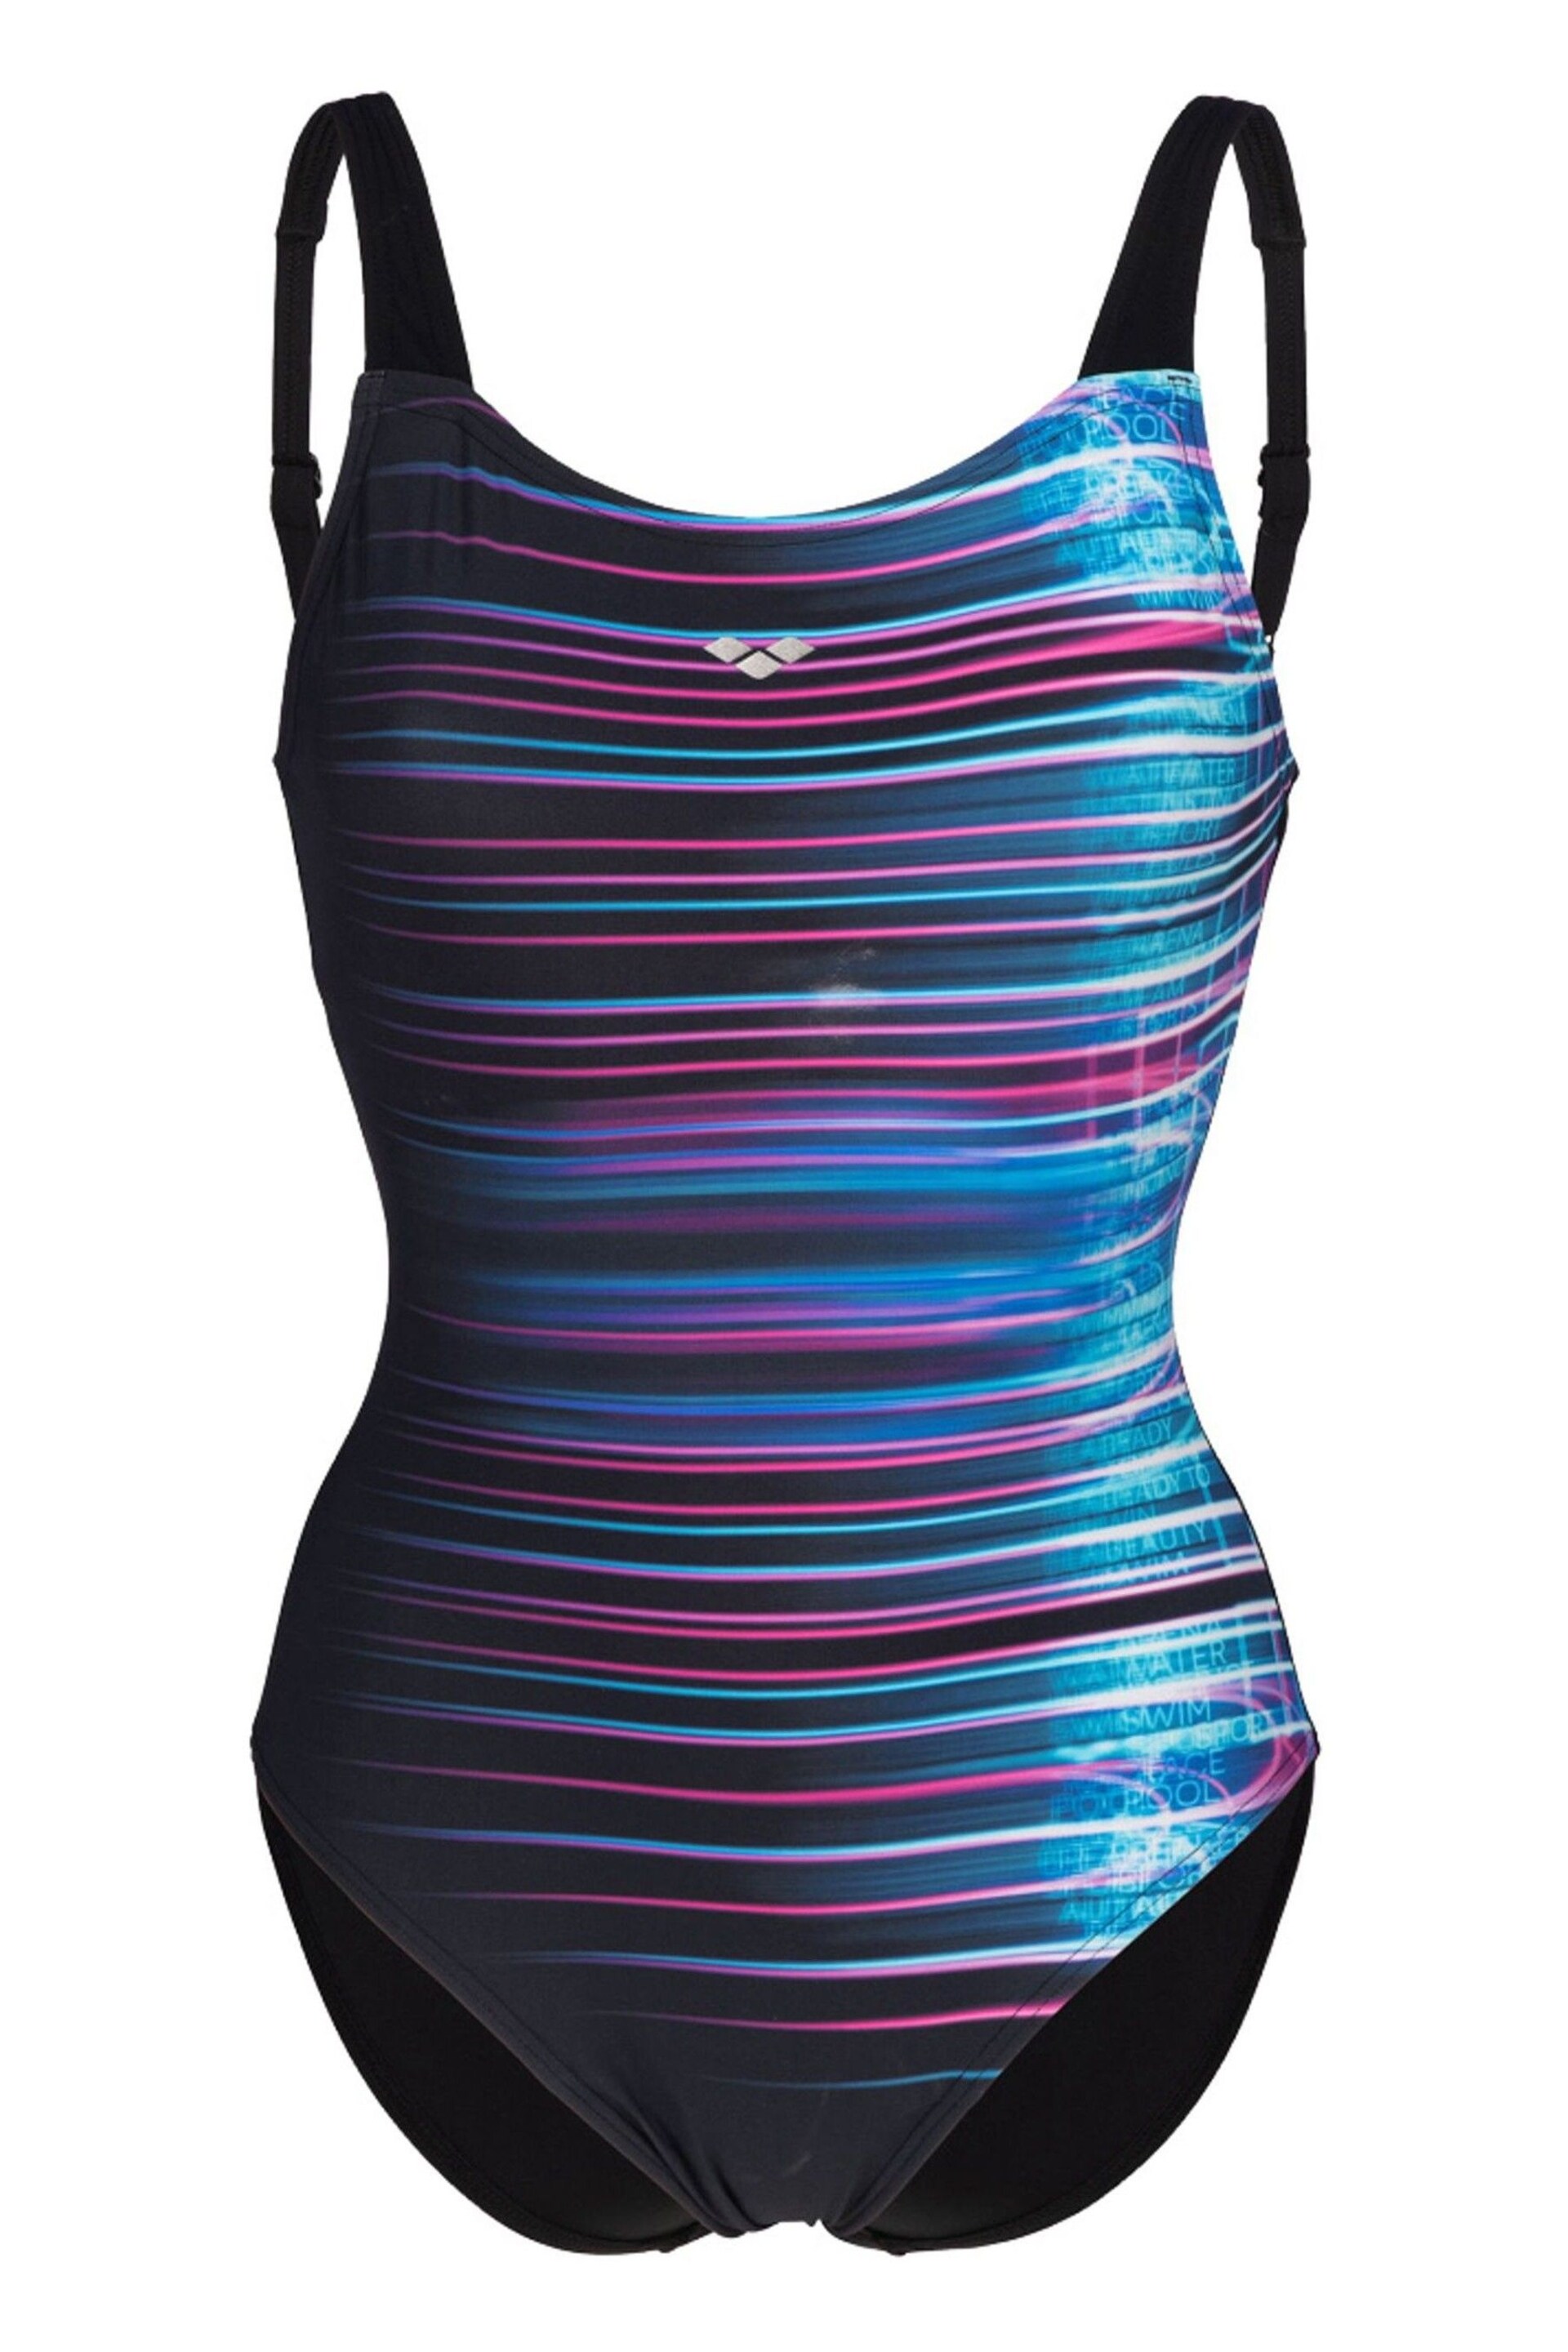 Arena Womens Bodylift Maria B-Cup Black Swimsuit - Image 6 of 9